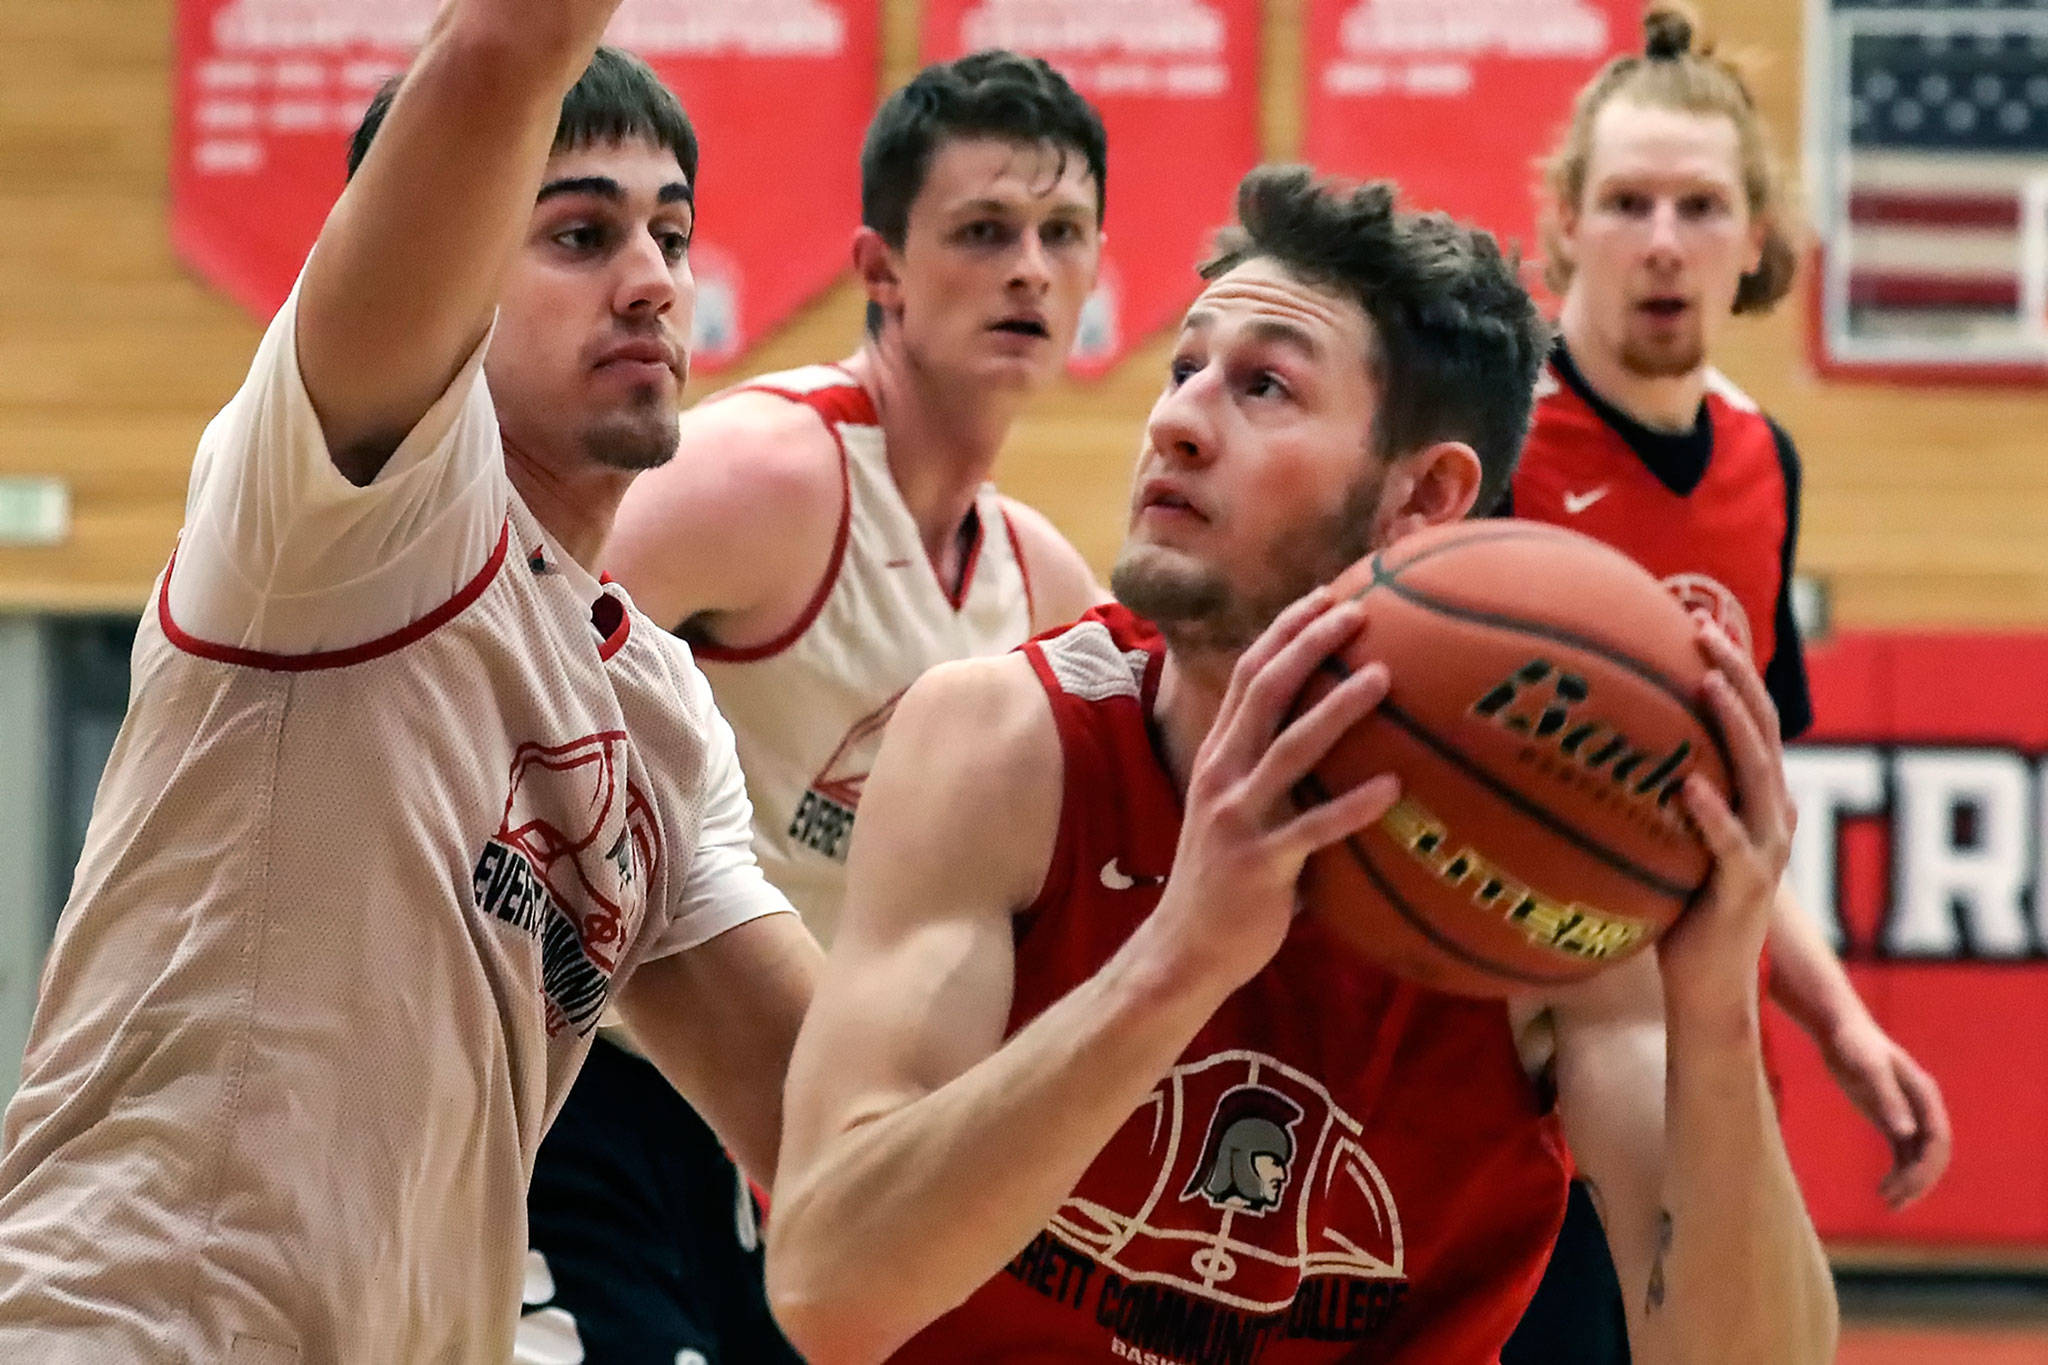 Everett Community College’s Cameron Underwood (right) looks to the basket during a practice on March 2, 2020, in Everett. (Kevin Clark / The Herald)